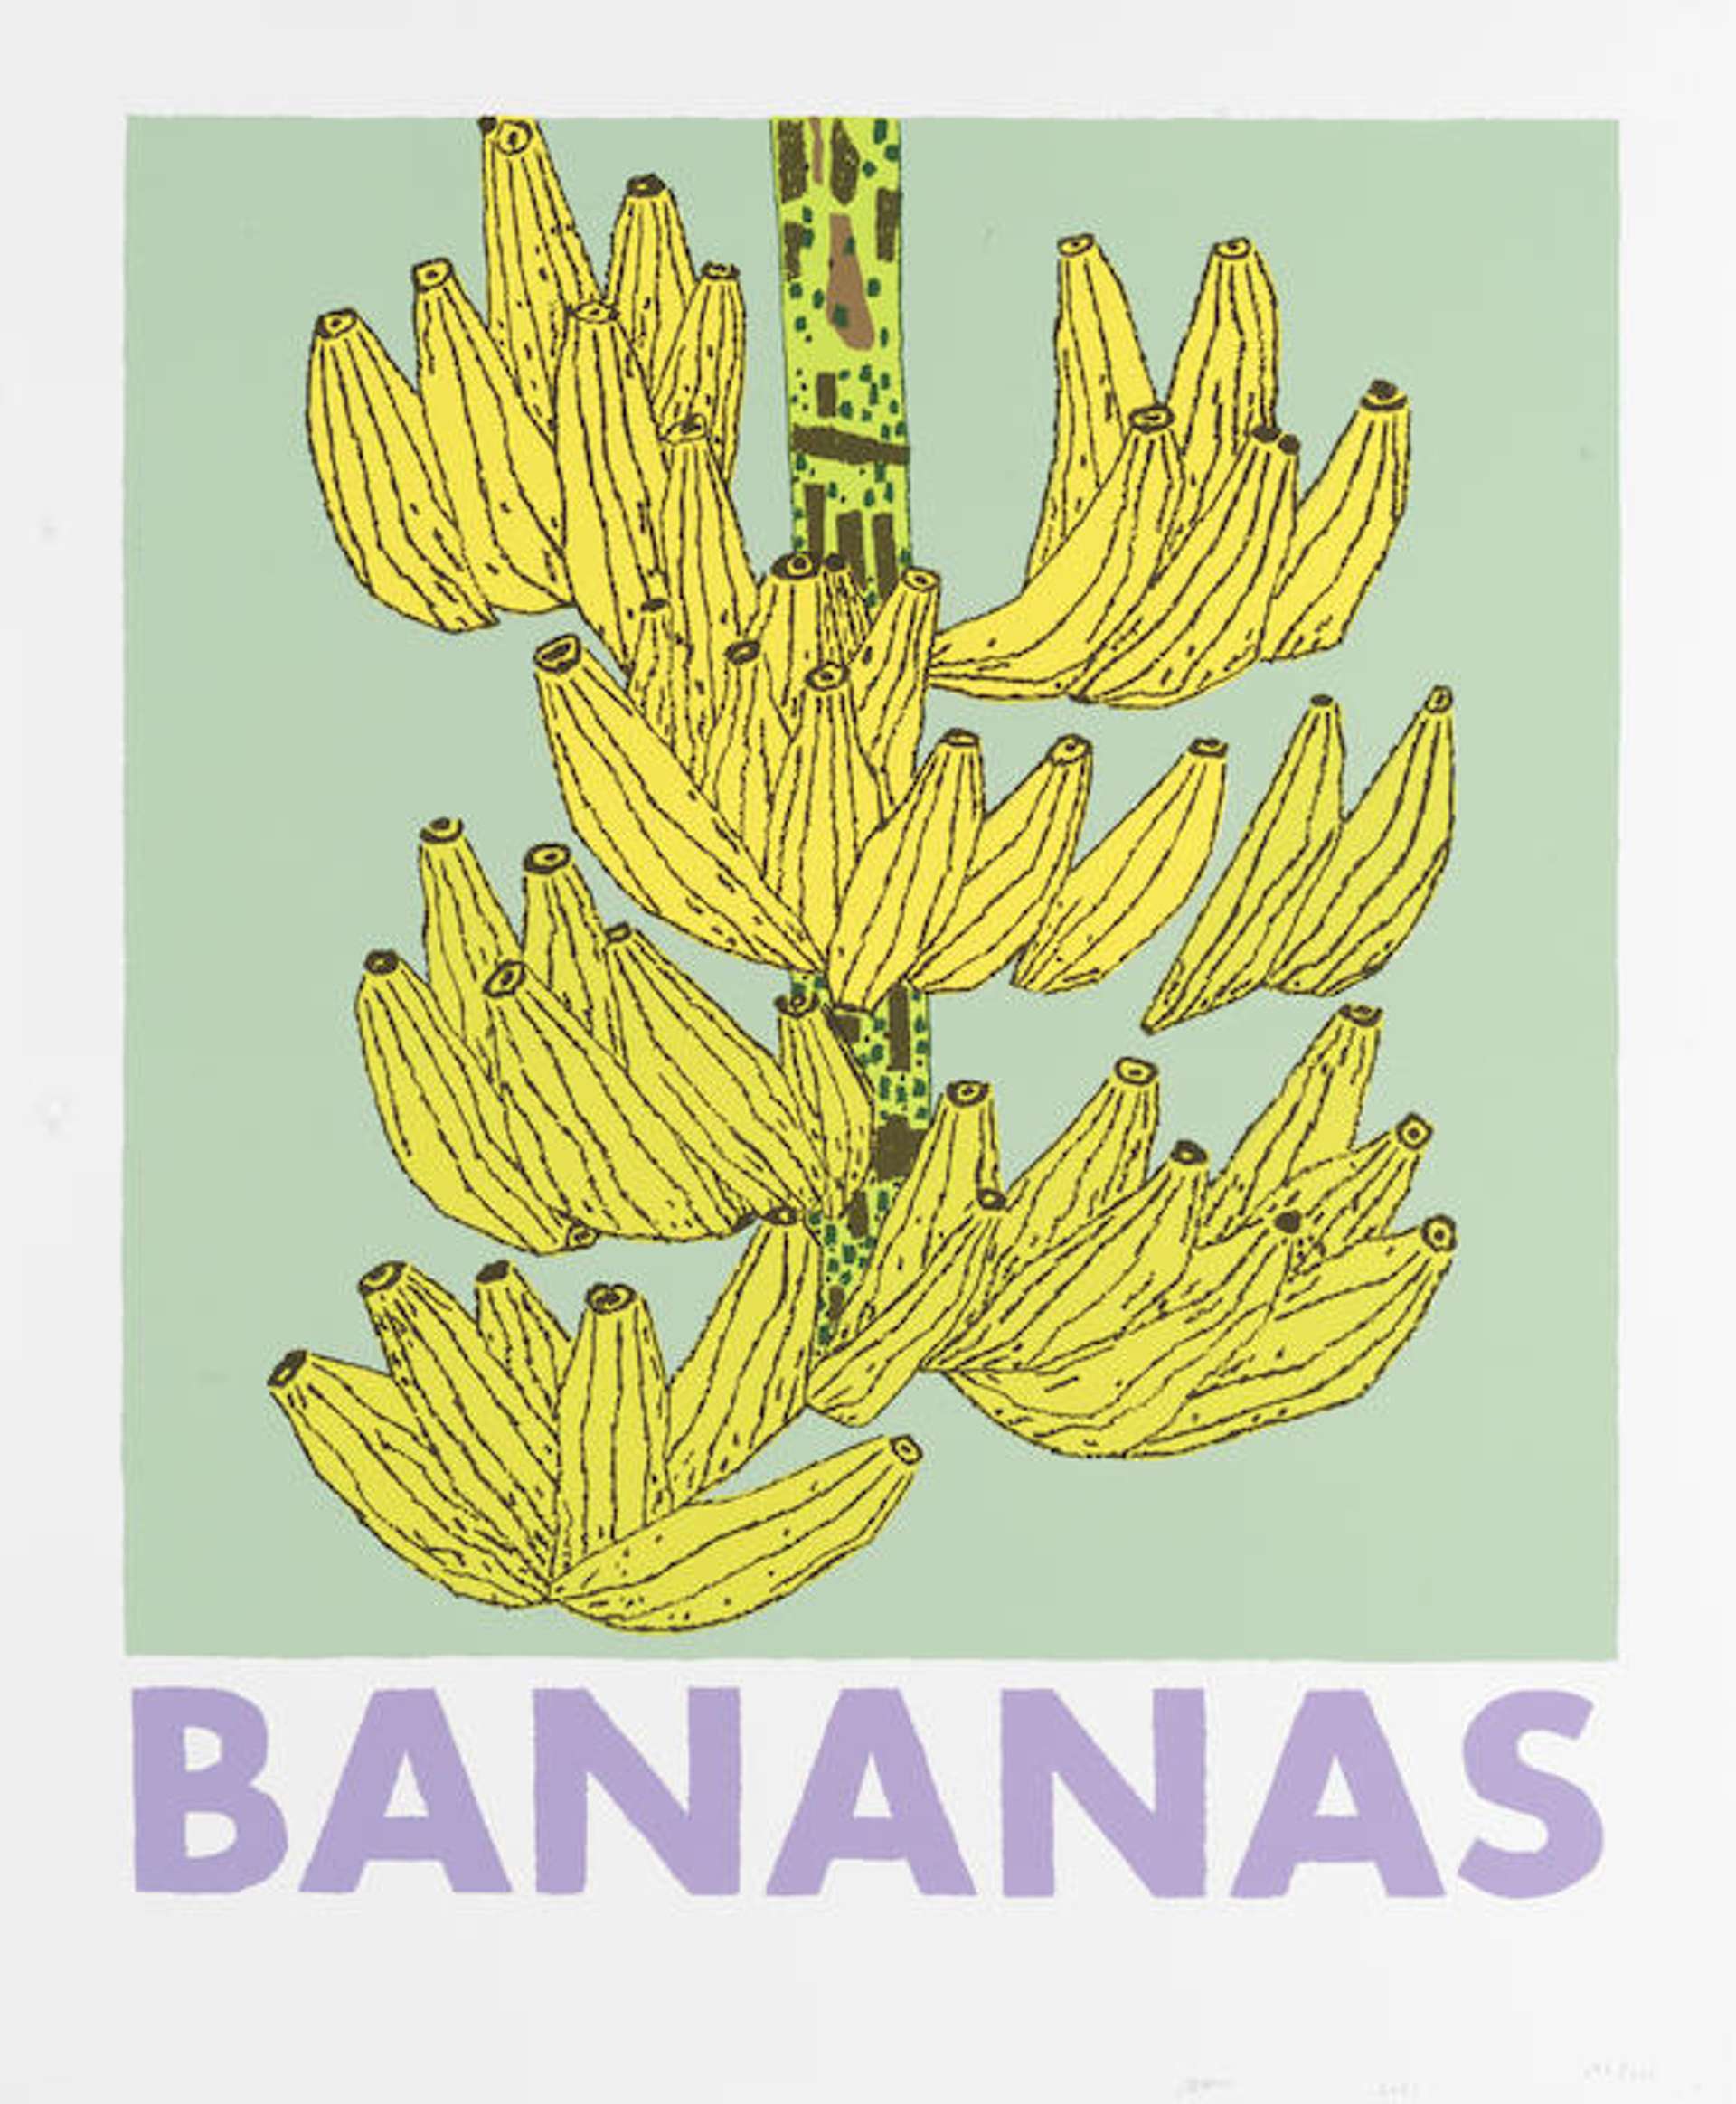 This print shows a banana plant, with several bunches of bananas against a pastel blue background.